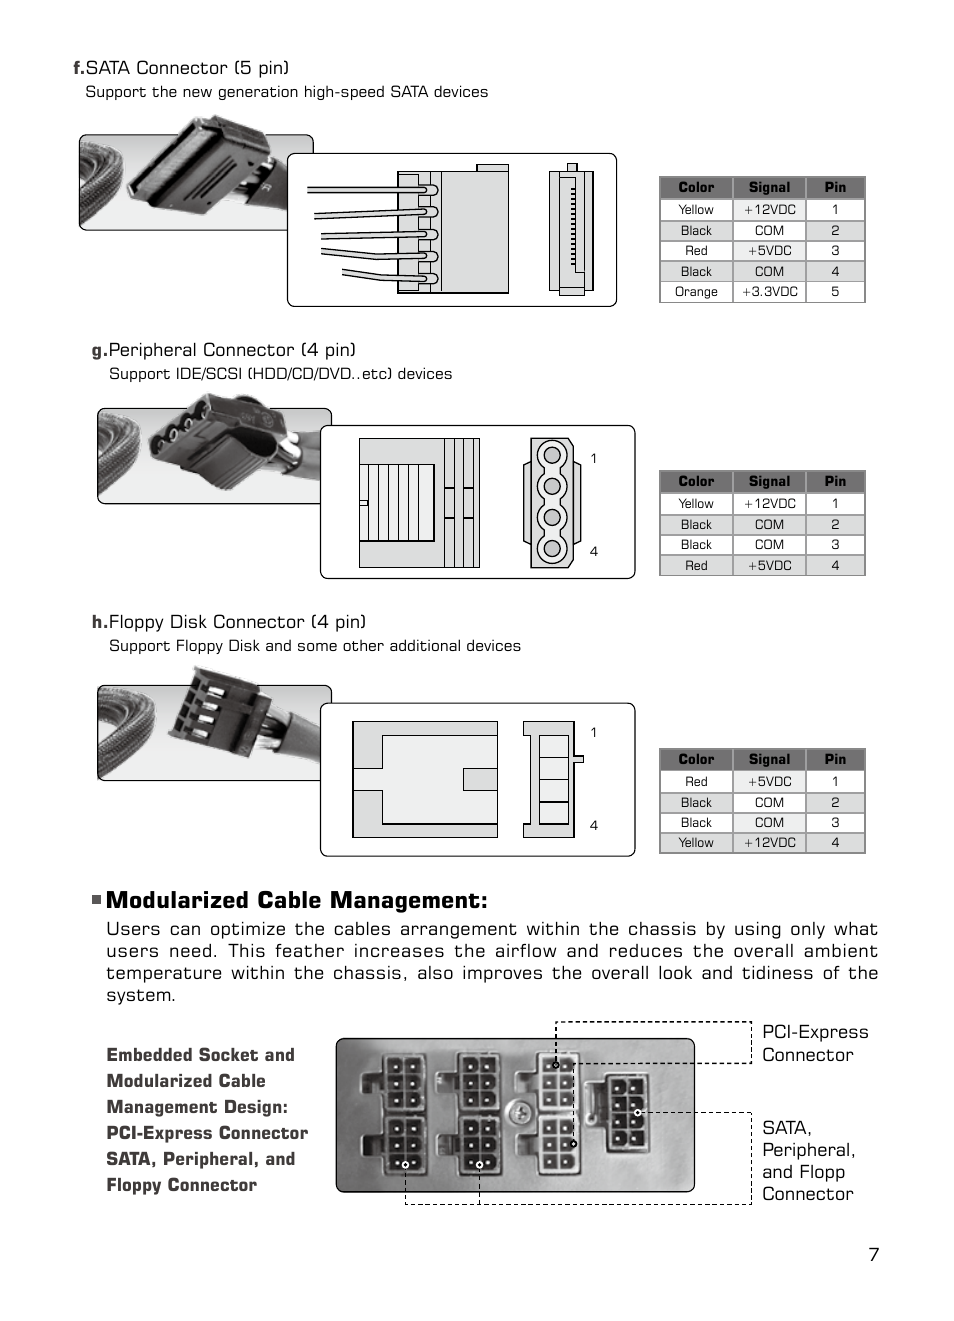 Modularized cable management, G. peripheral connector (4 pin), H. floppy disk connector (4 pin) | XIGMATEK NRP-HC1001 User Manual | Page 8 / 62